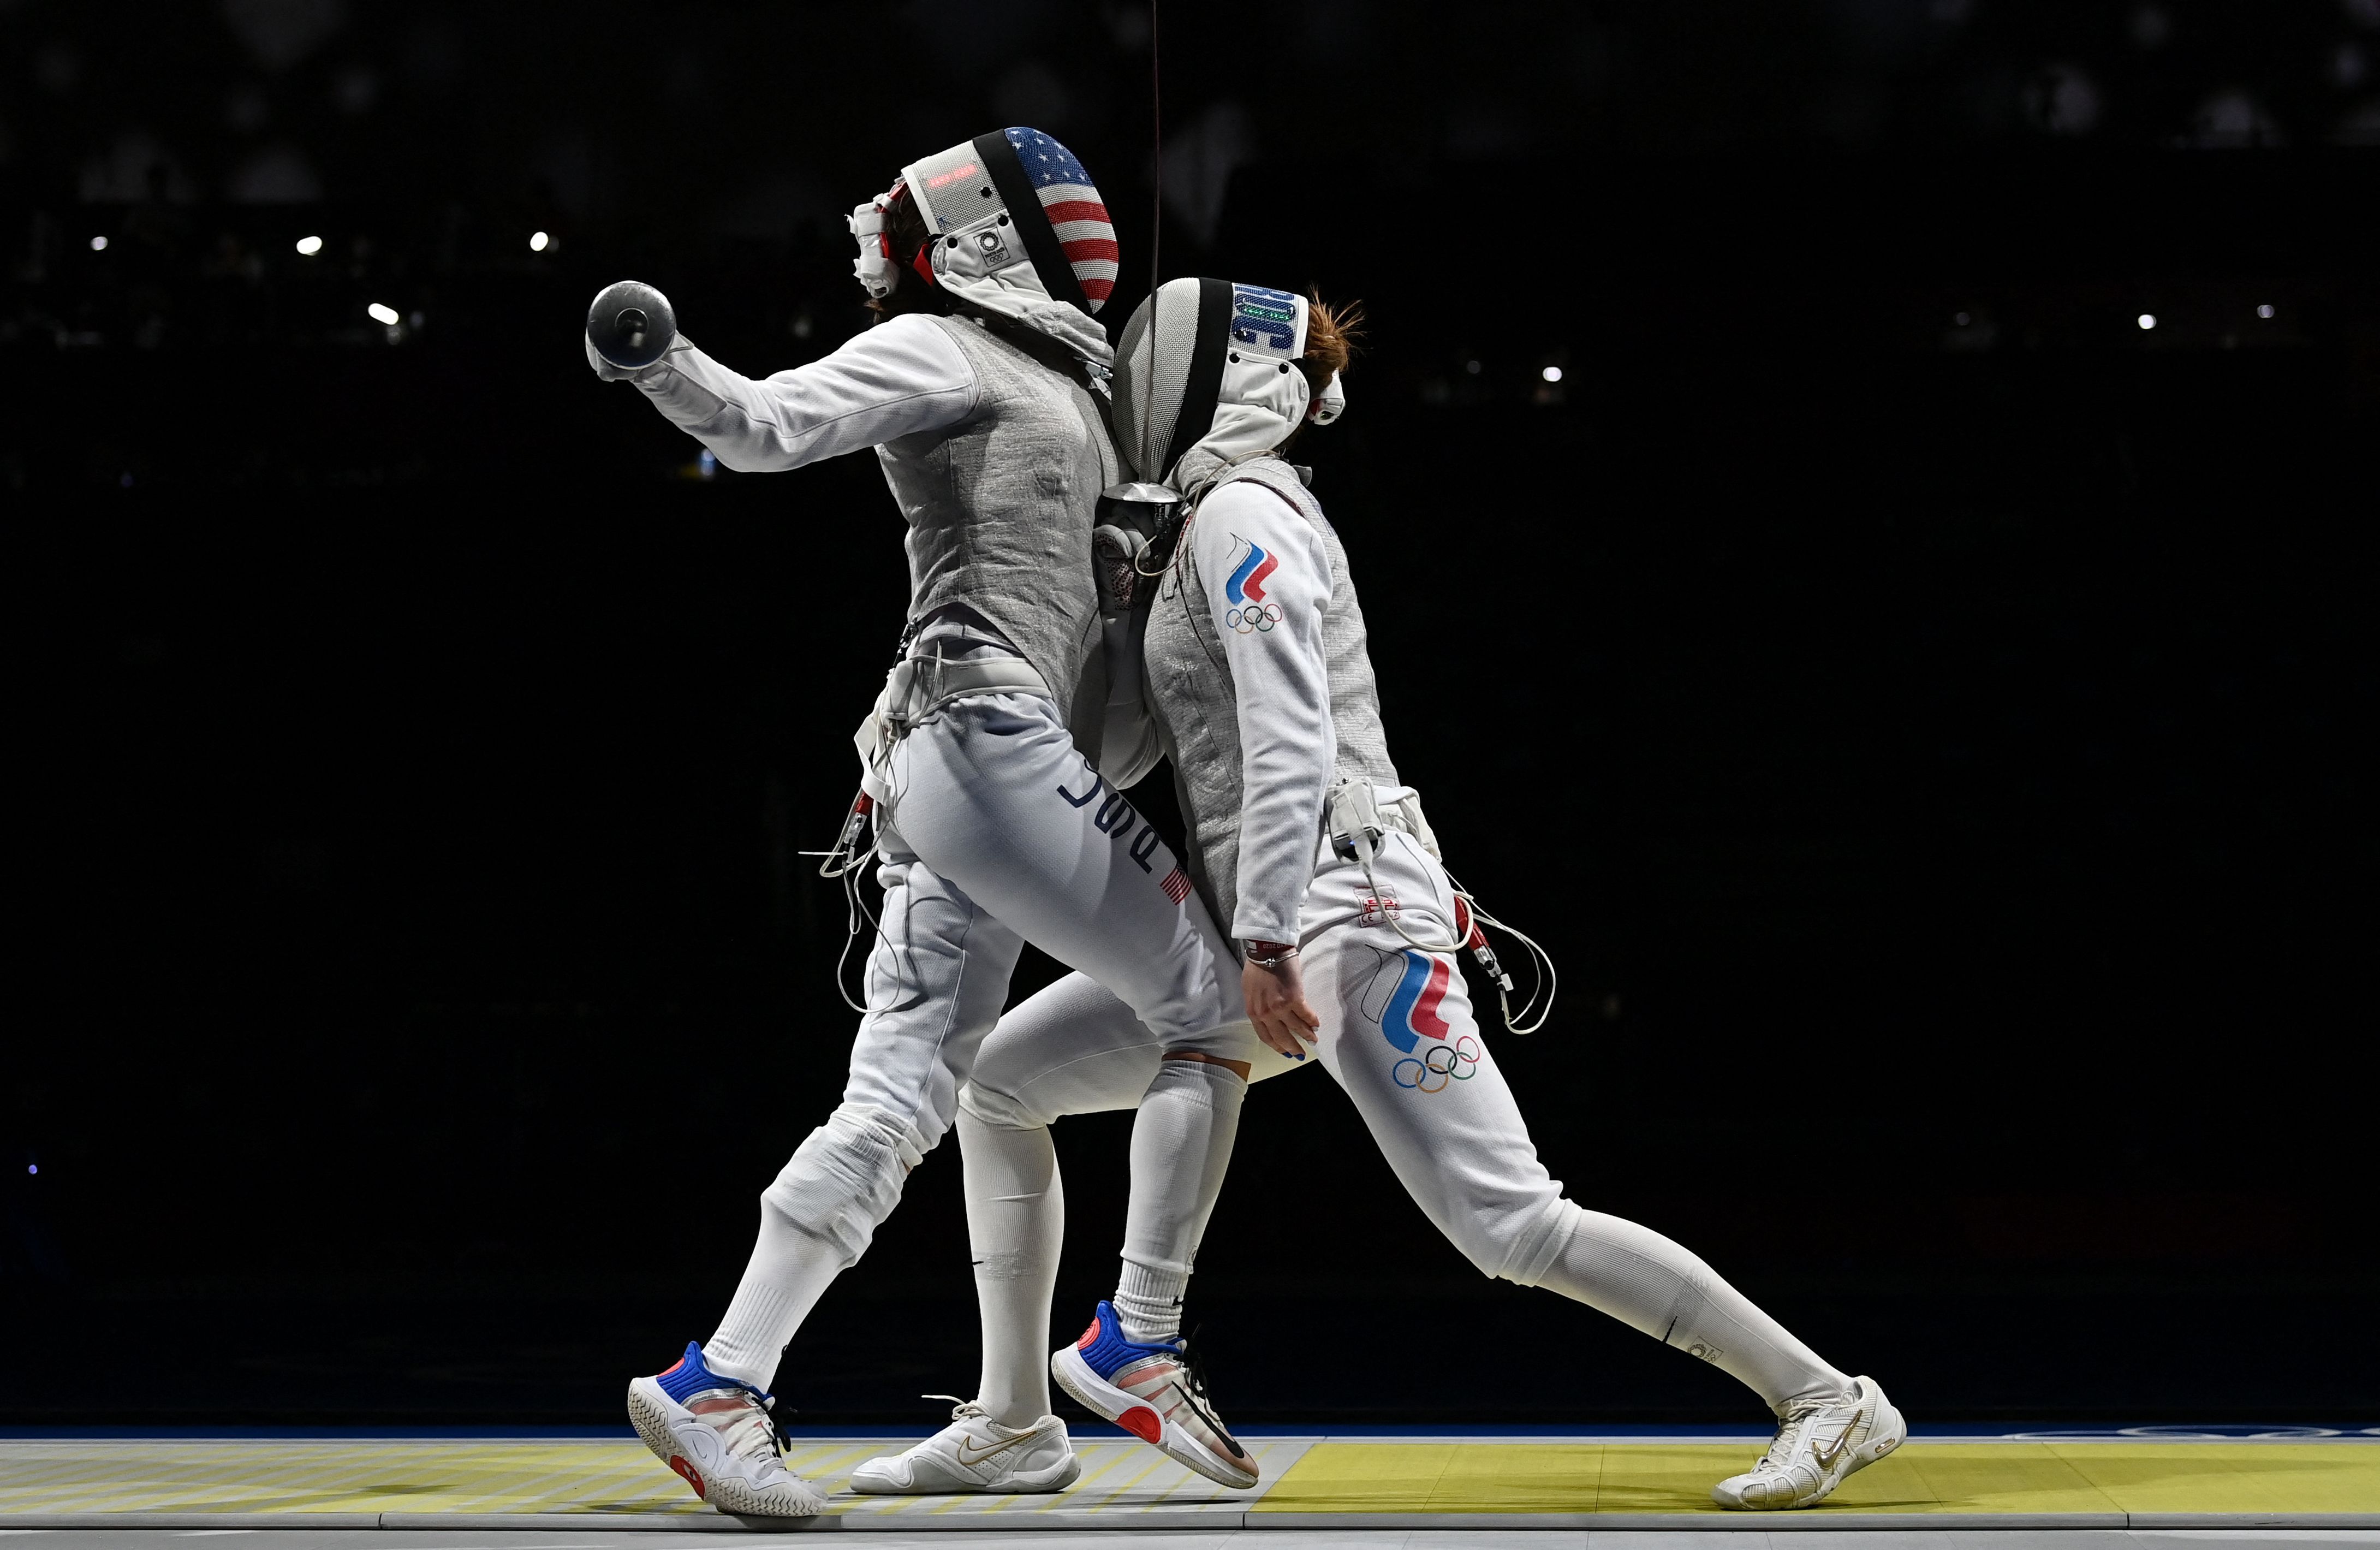 USA's Nicole Ross (L) compete against Russia's Marta Martyanova in the women's foil team semifinal bout during the Tokyo 2020 Olympic Games on July 29